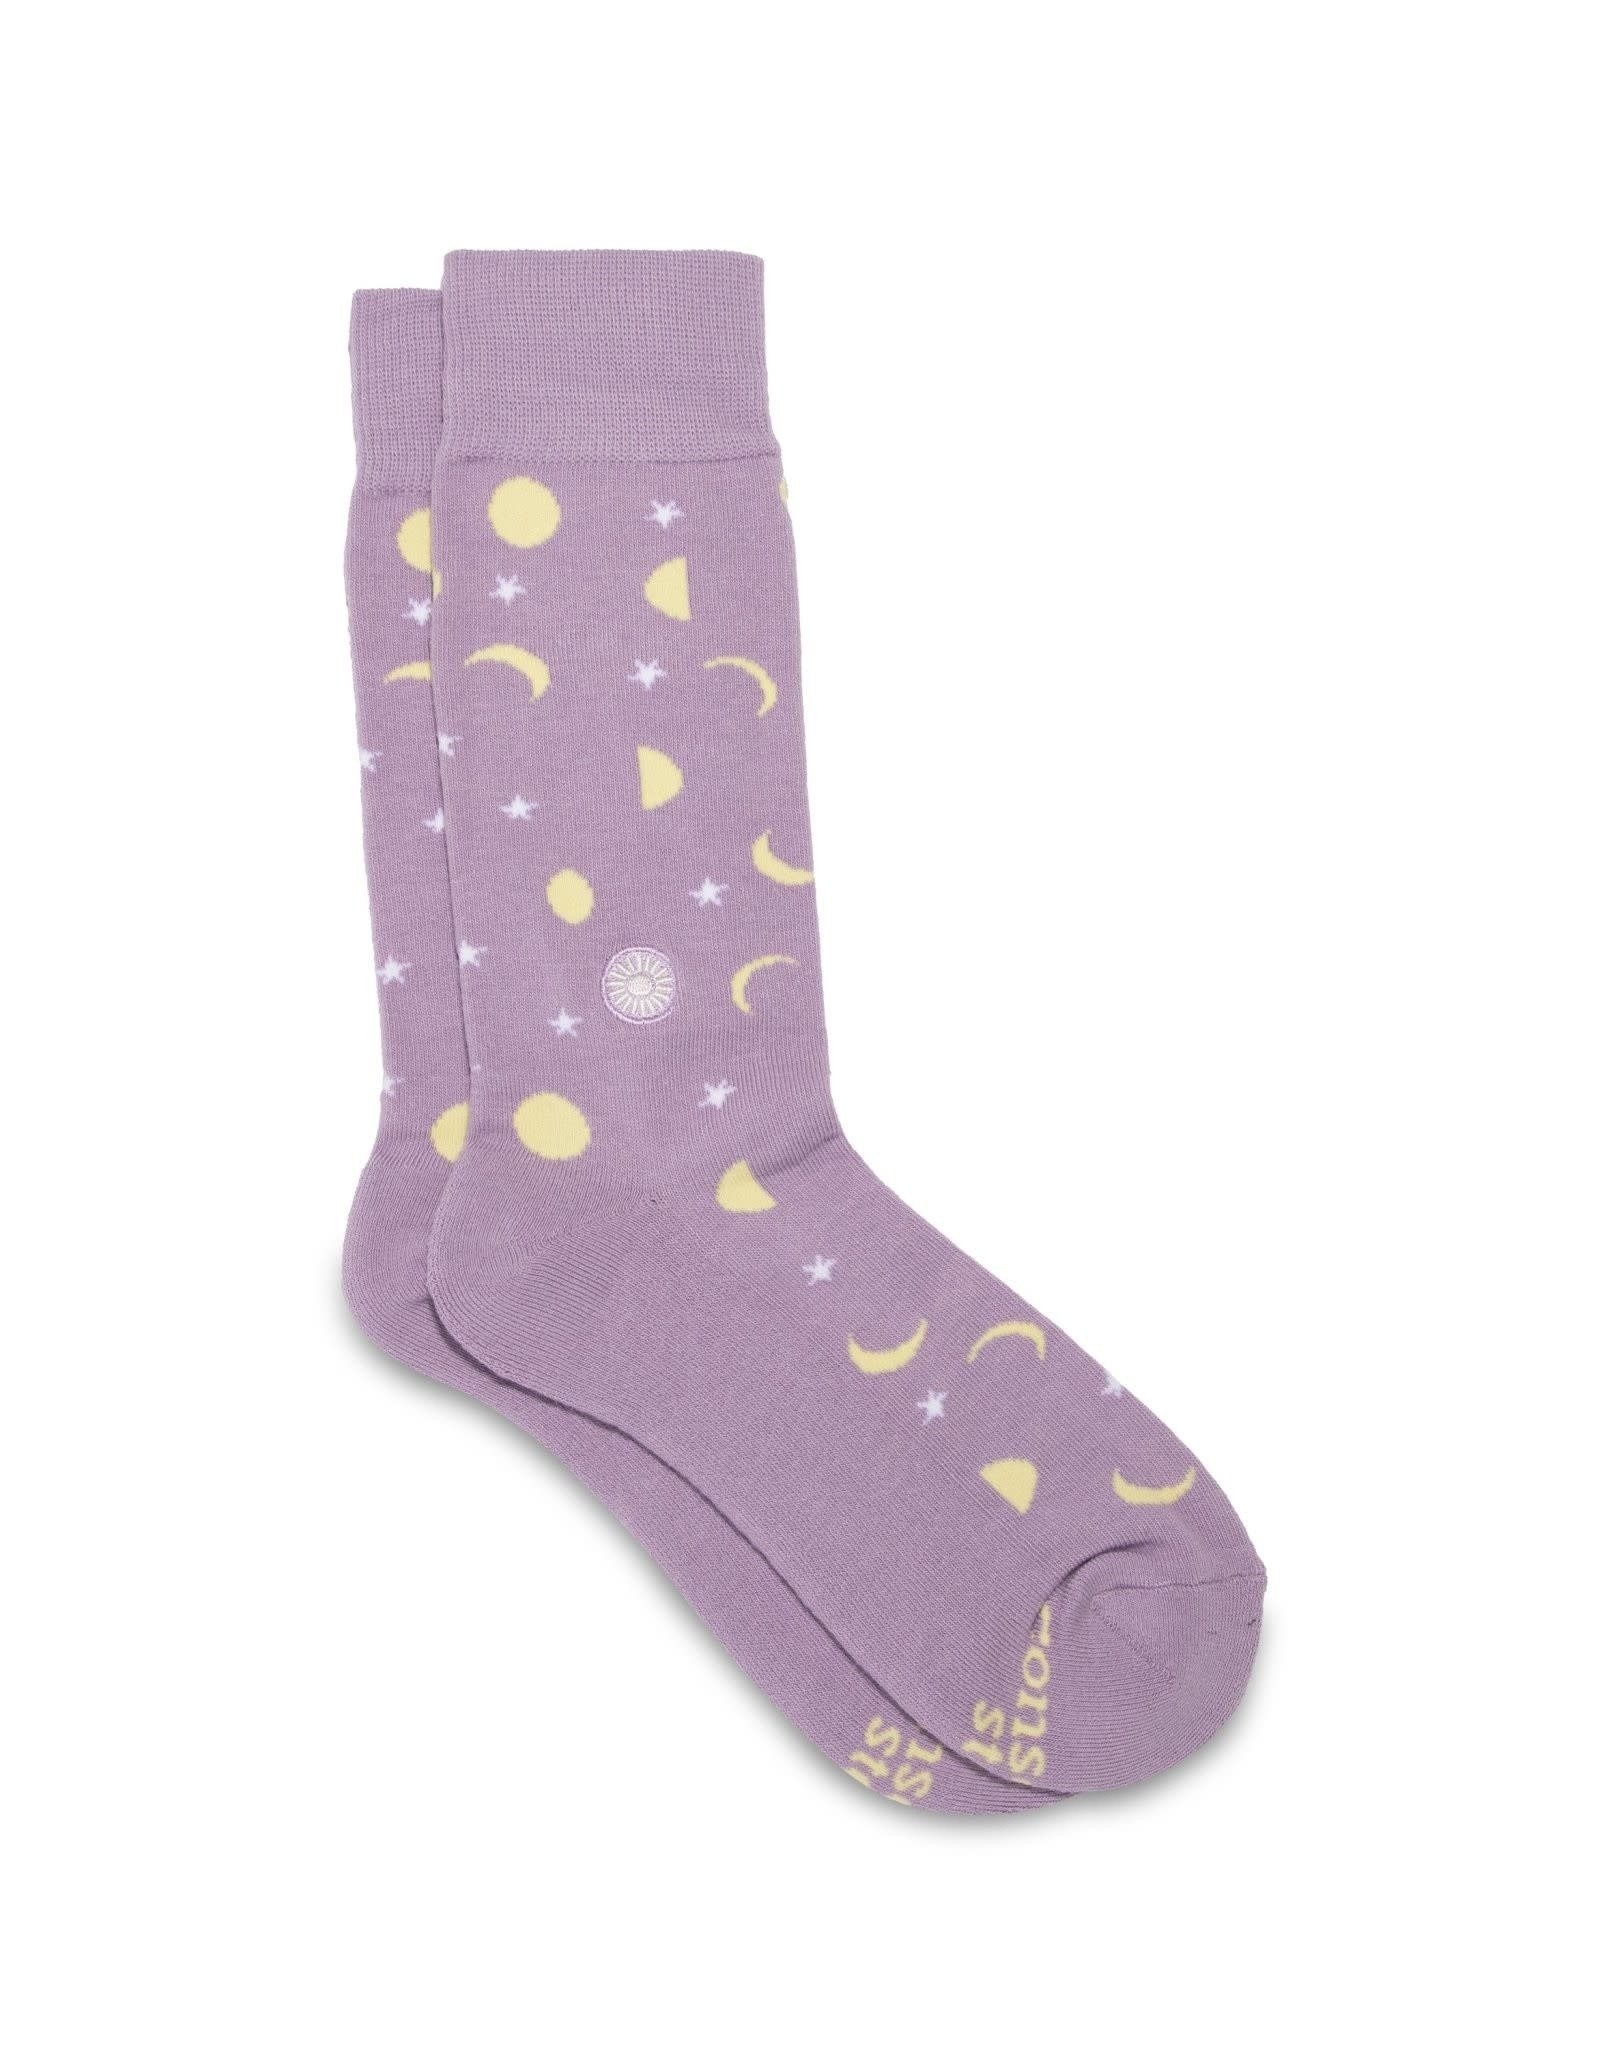 Conscious Step Socks that Support Mental Health (Sun and Moon)